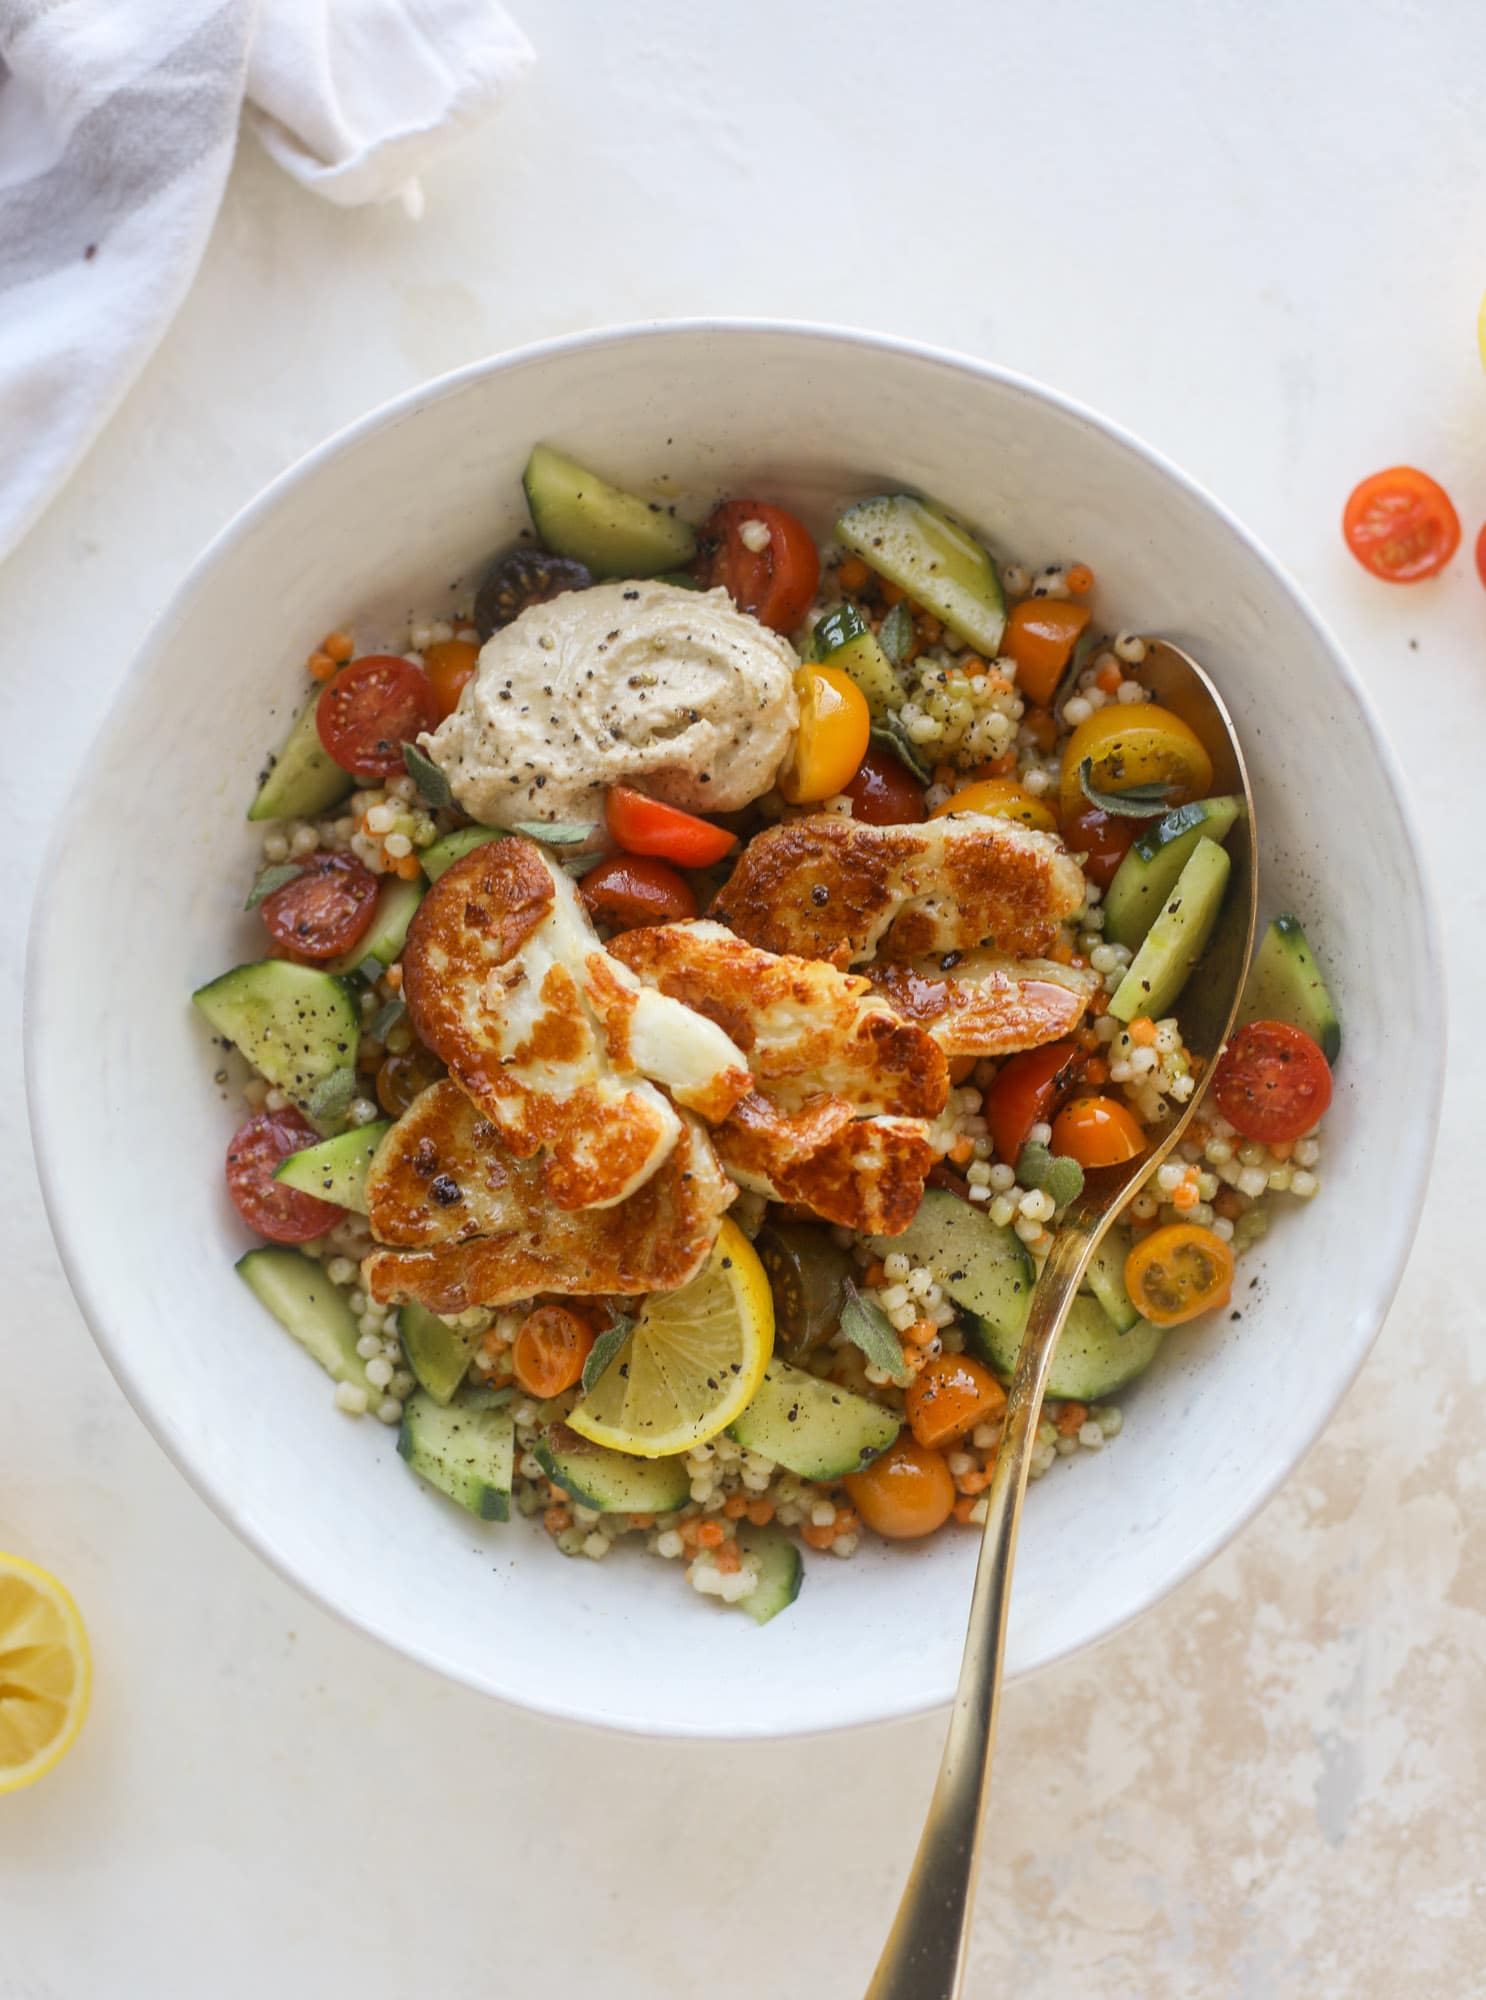 I am obsessed with these haulloumi hummus bowls for lunch or dinner. Couscous, veggies, crispy halloumi cheese and hummus with lots of lemon. Yum! I howsweeteats.com #halloumi #hummus